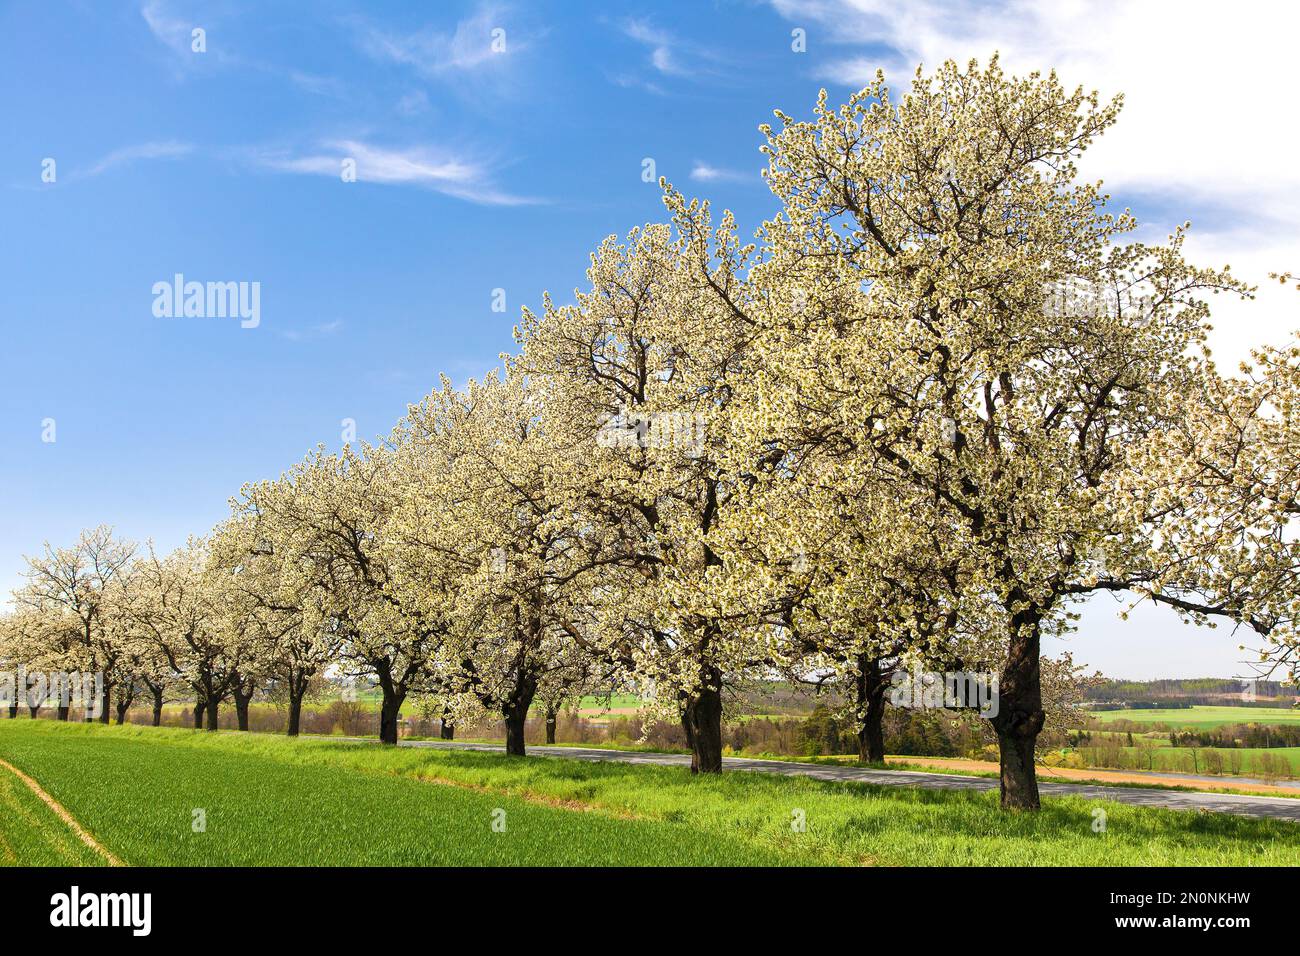 green field, road and alley of flowering cherry trees in latin Prunus cerasus with beautiful sky. White colored flowering cherrytree Stock Photo